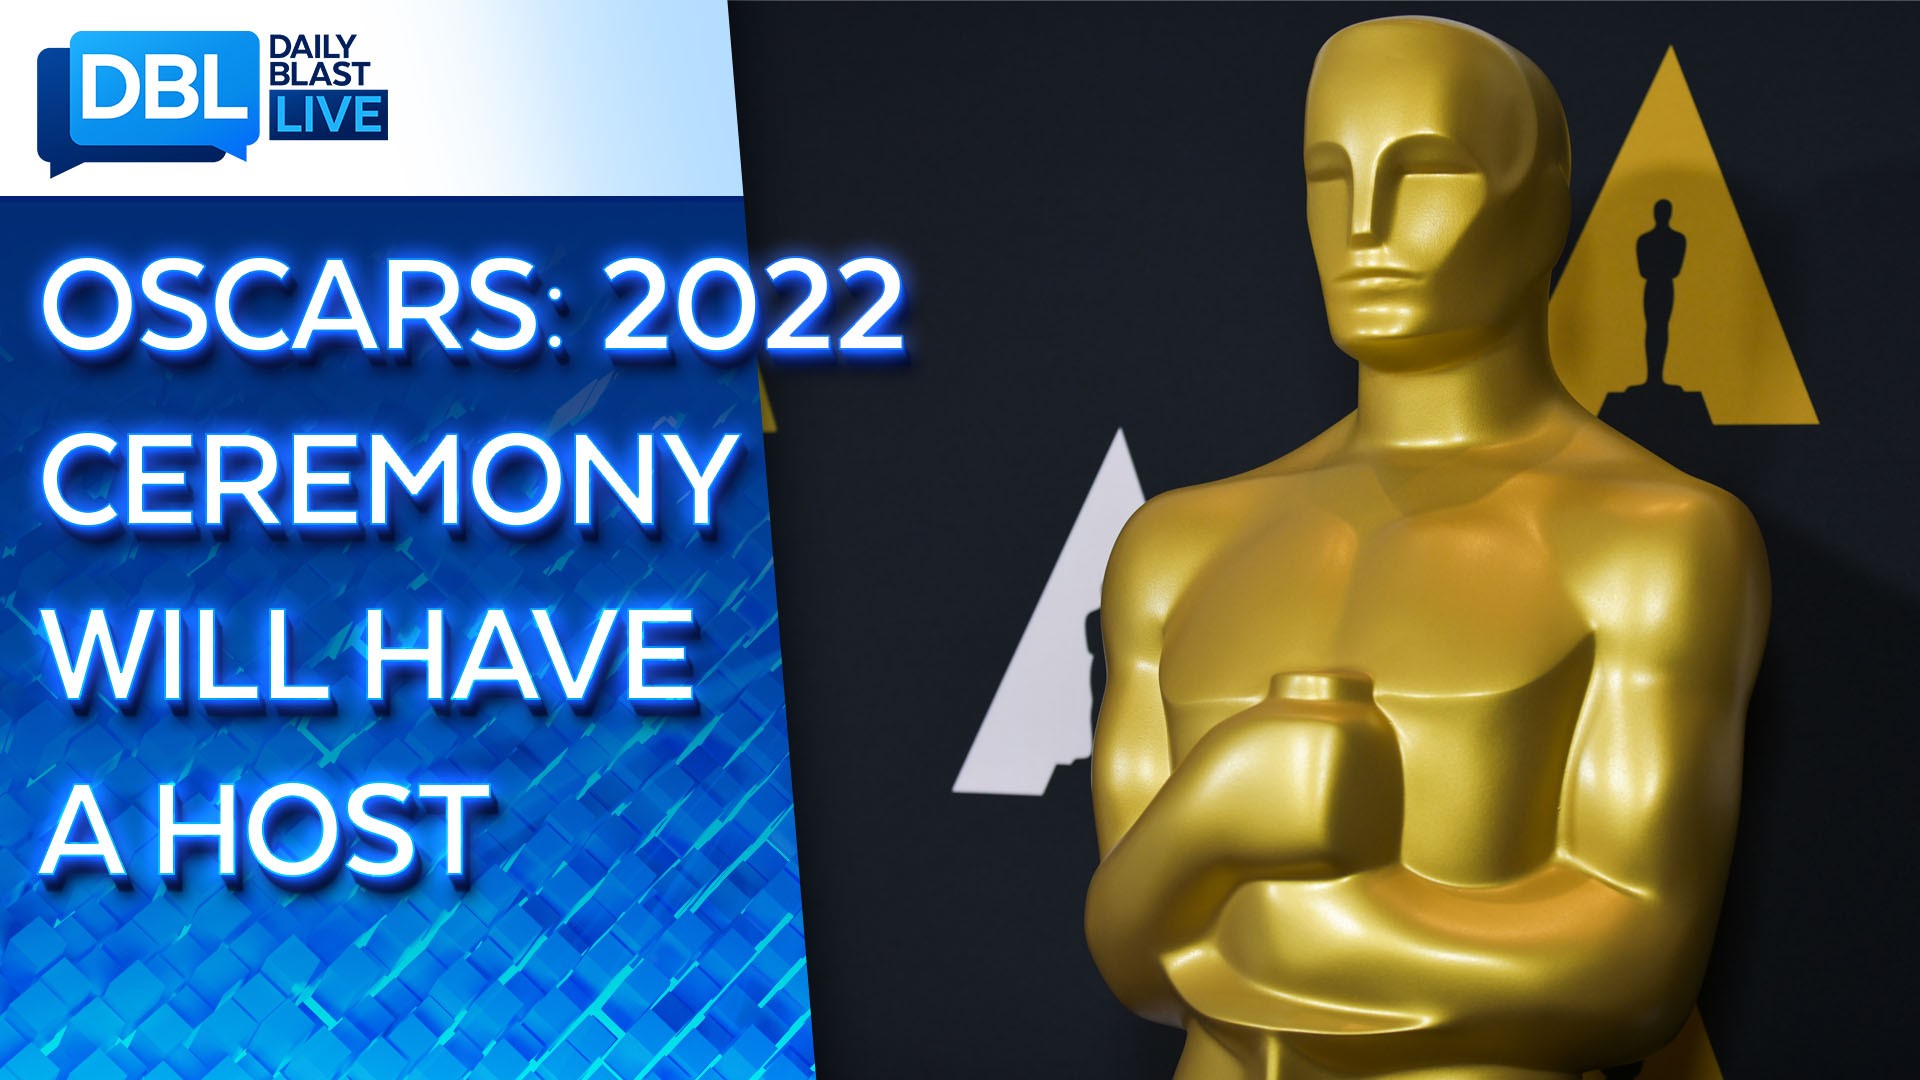 After three consecutive years of the Oscars being a host-less affair, the Academy Awards will have a host again in 2022, according to ABC.